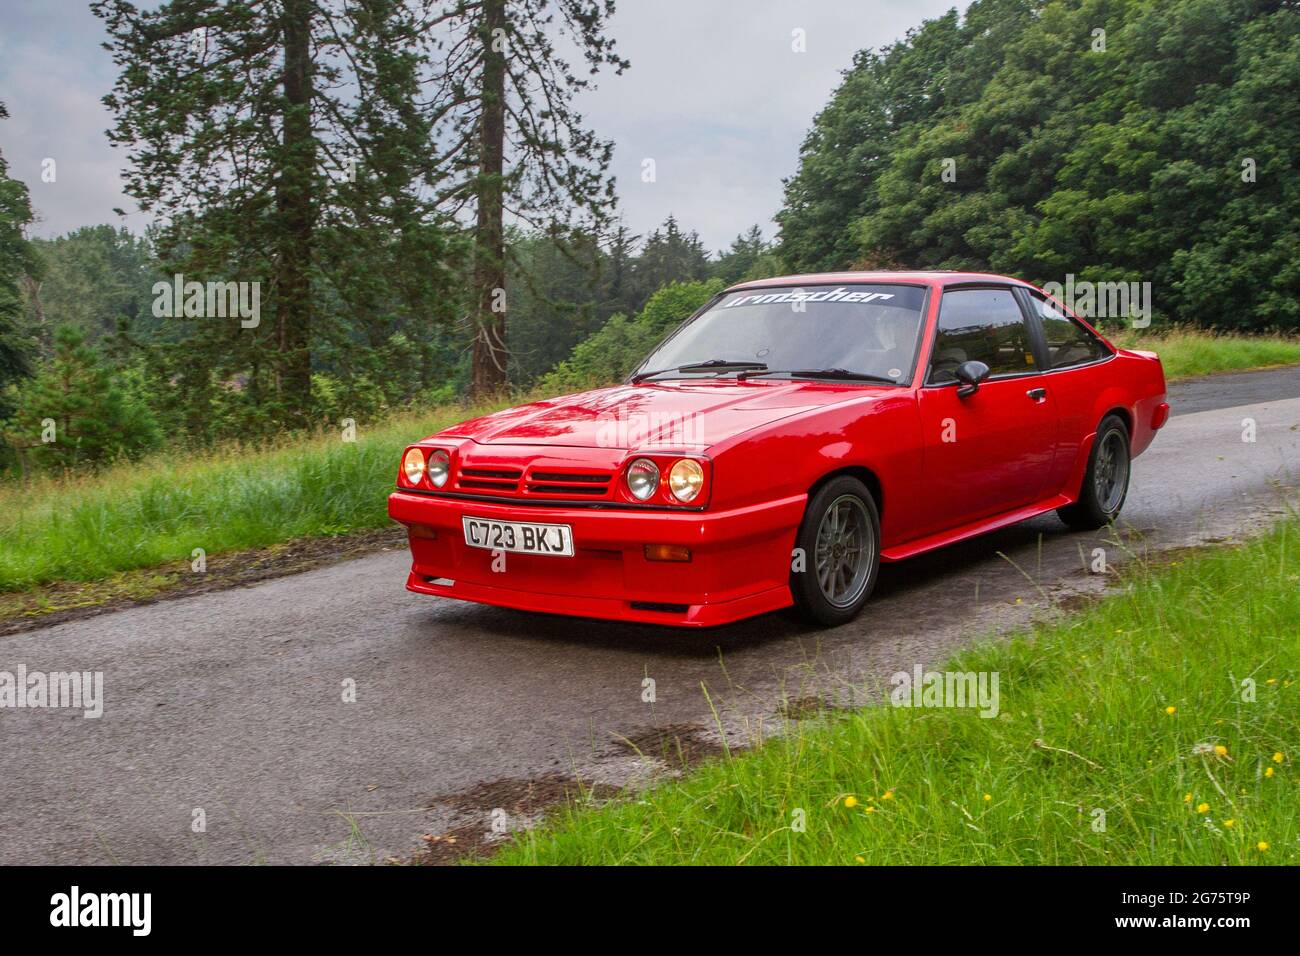 1985 80s red Opel GT 5 speed manual 1796 cc petrol 2dr coupe en-route KLMC  The Cars the Star Show in Holker Hall & Gardens, Grange-over-Sands, UK  Stock Photo - Alamy